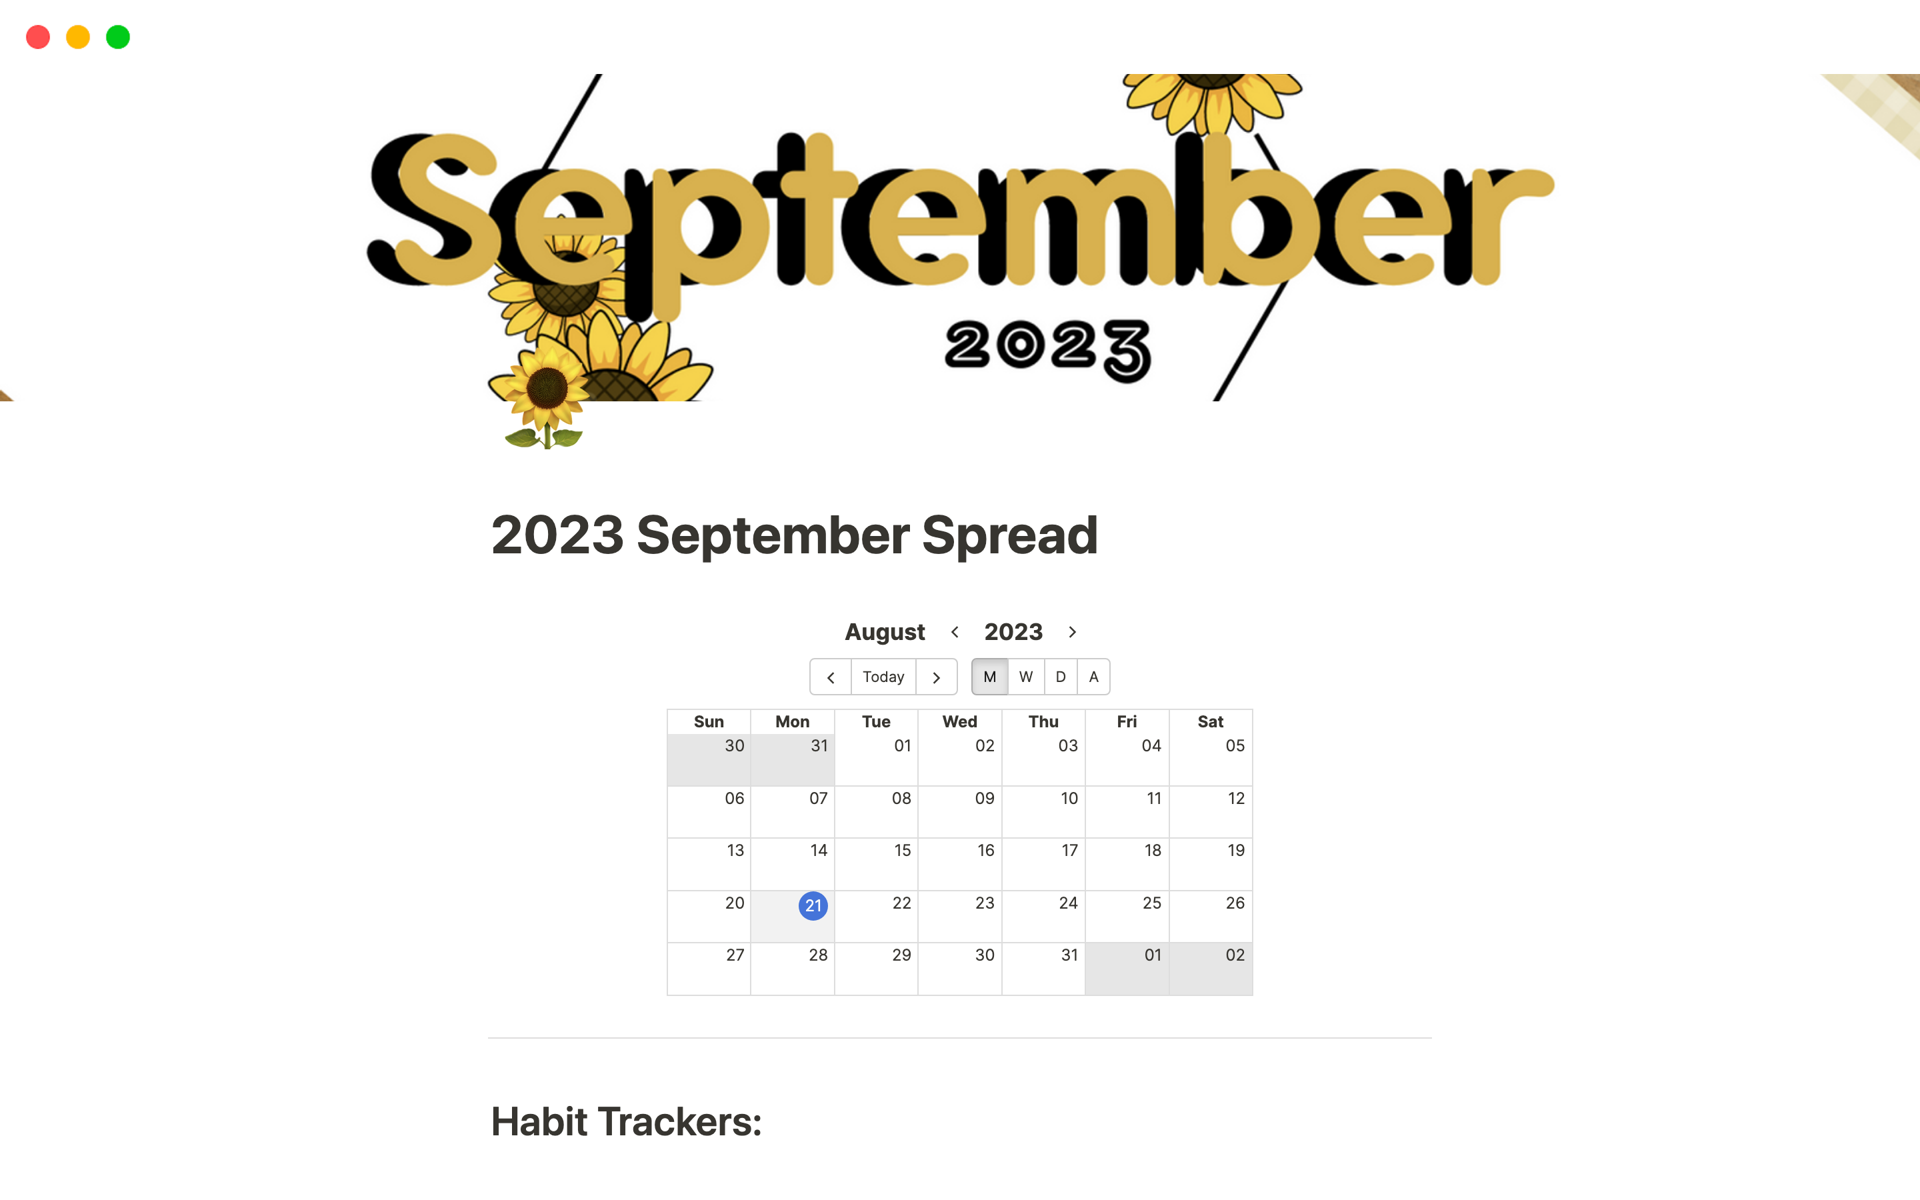 Online habit, weather and mood tracker for September. 